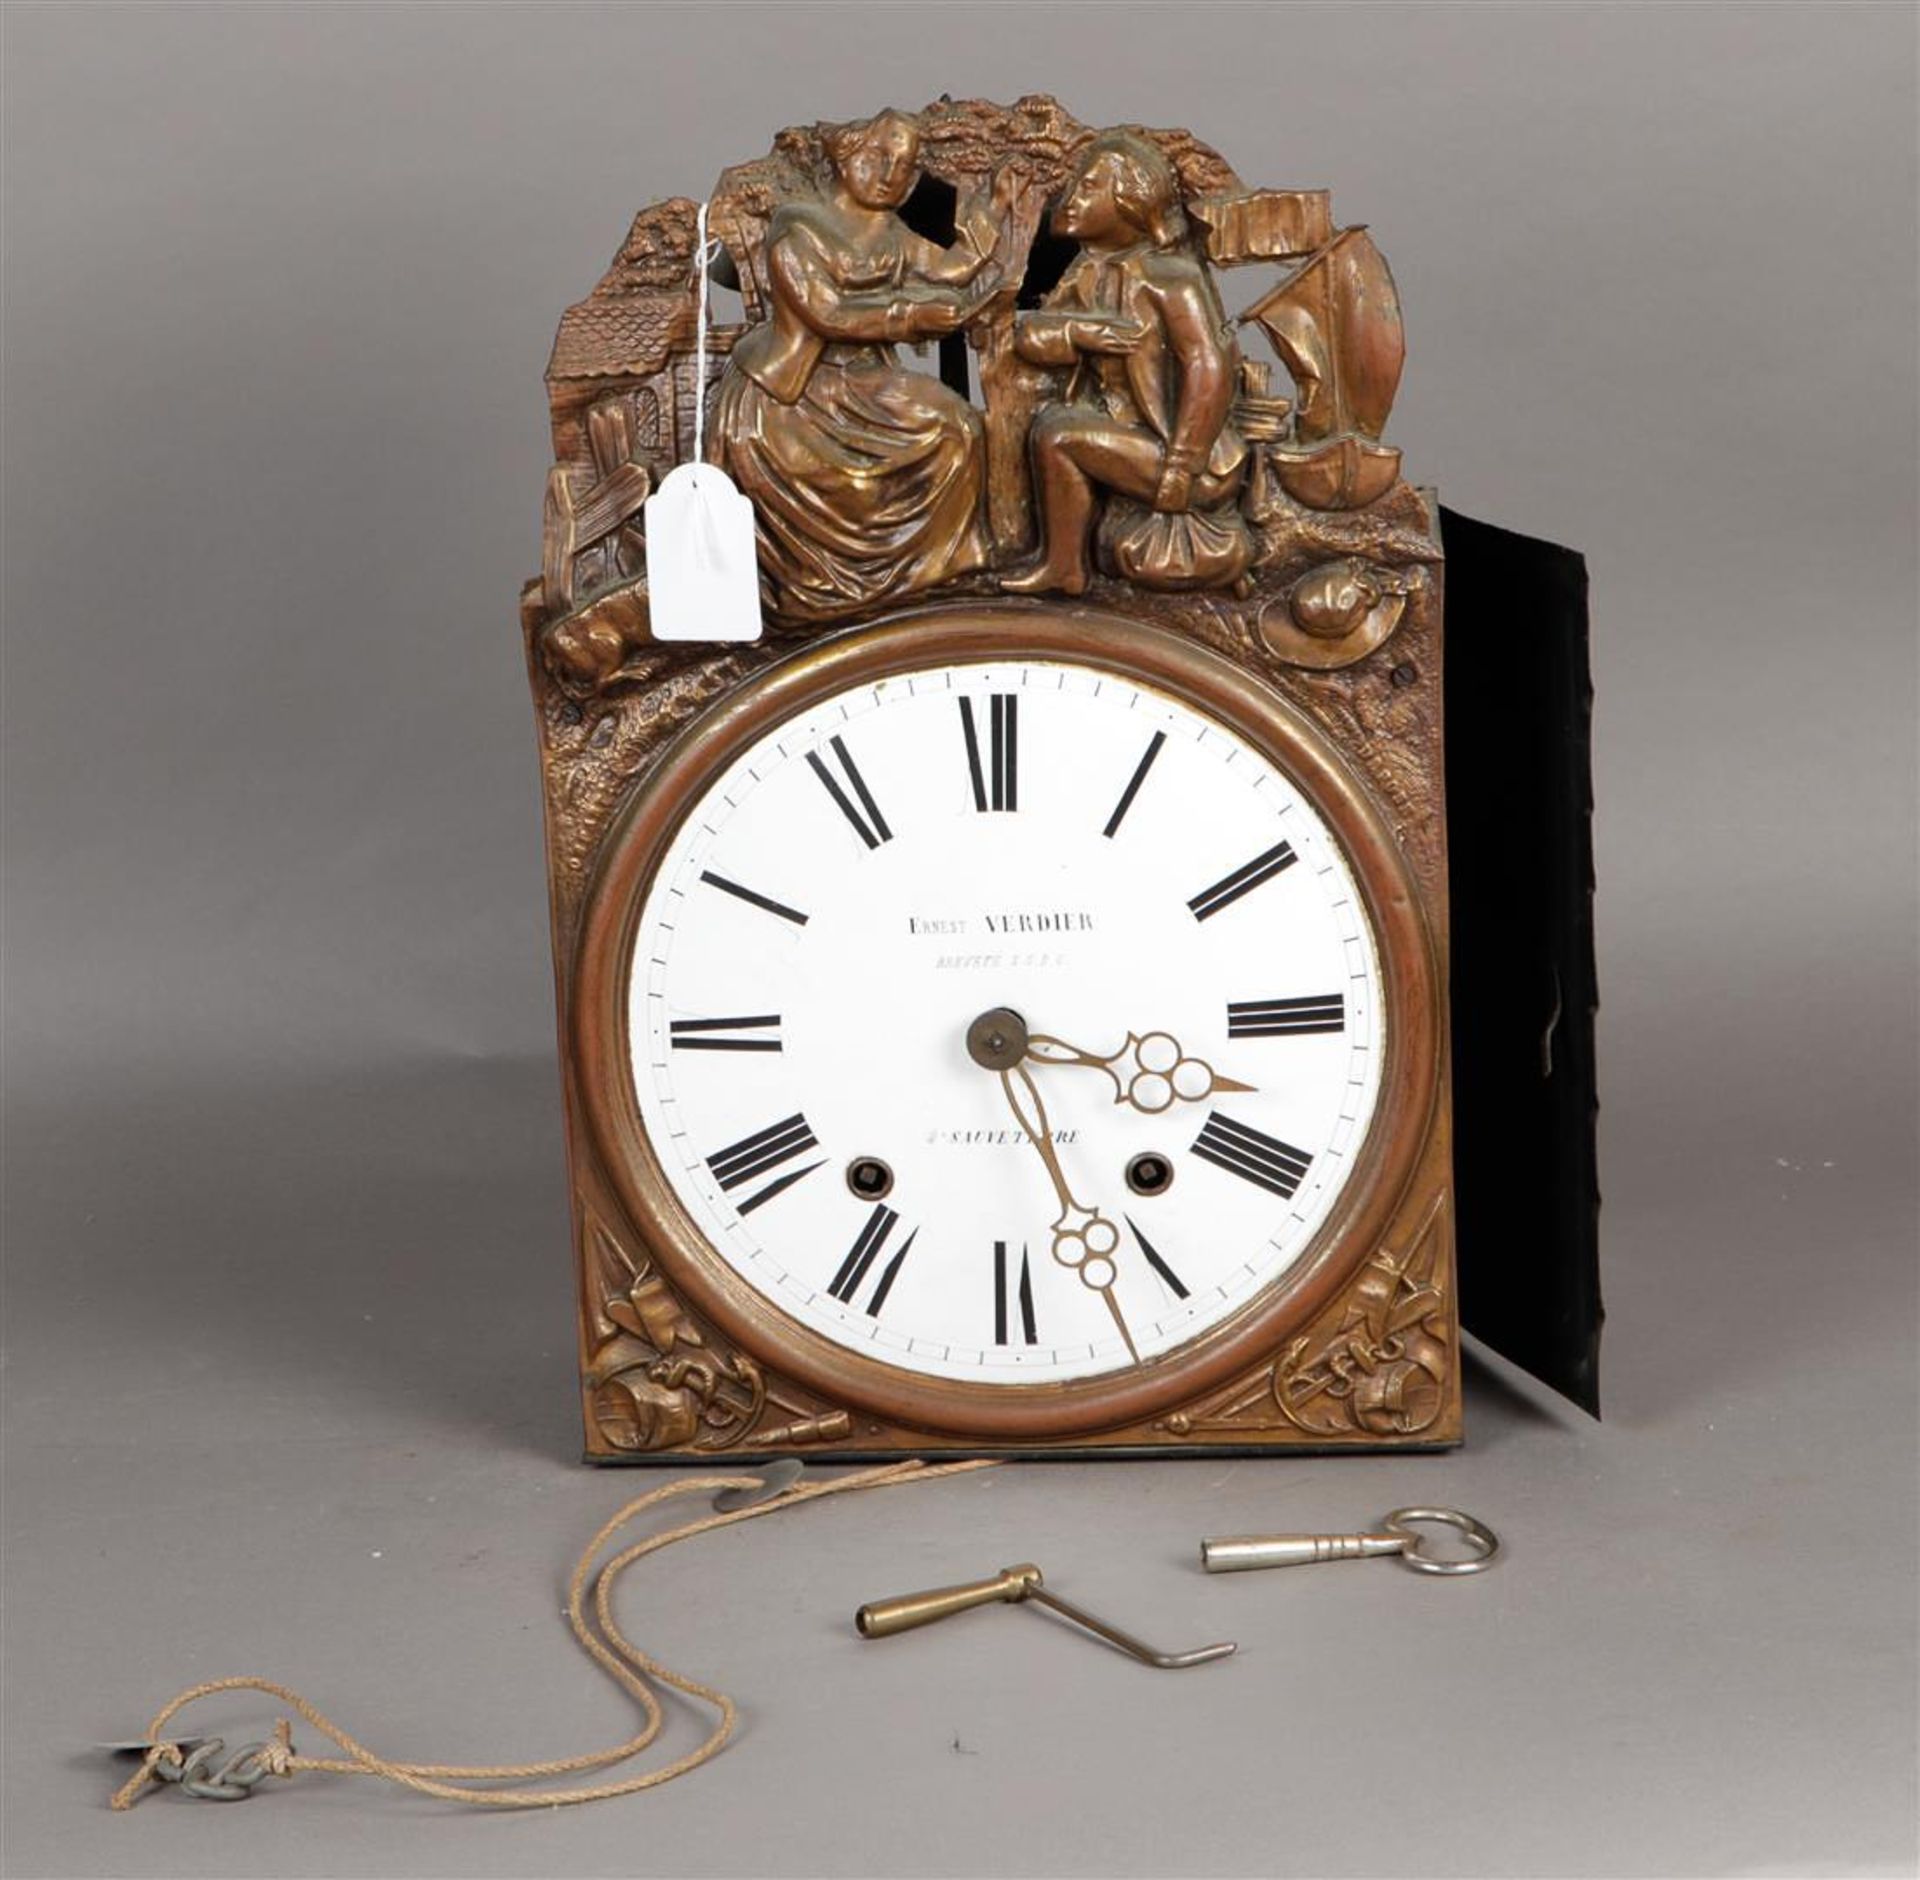 A French Comtoise clock. Address Ernest Verdier. First half 19th century. Not tested for long-term e